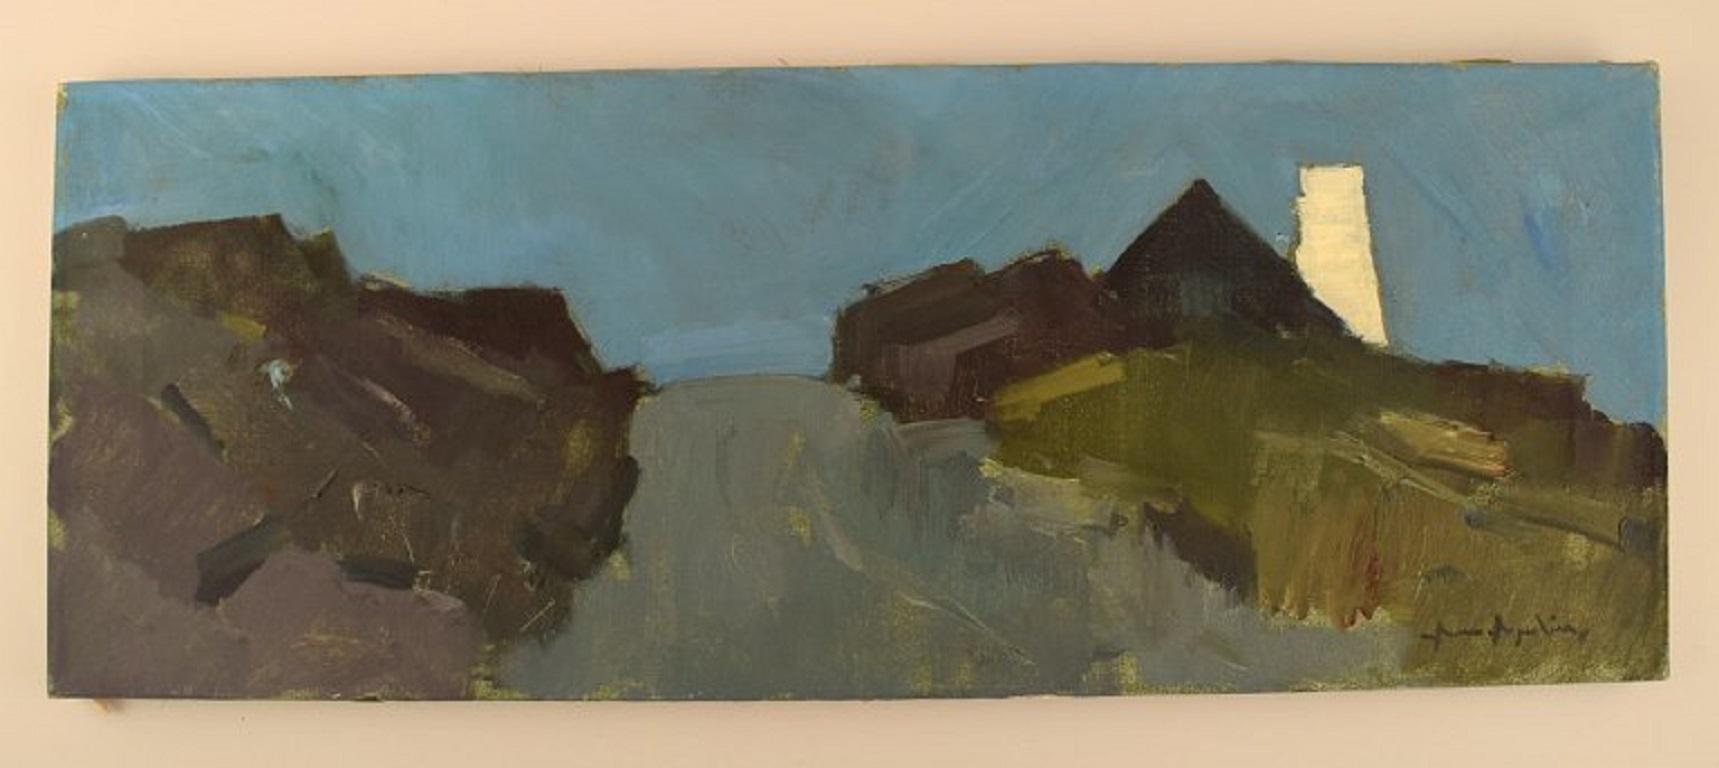 Arne Aspelin (1911-1990), Sweden. Oil on canvas. Modernist landscape. Mid 20th century.
The canvas measures: 65 x 25 cm.
In excellent condition.
Signed.